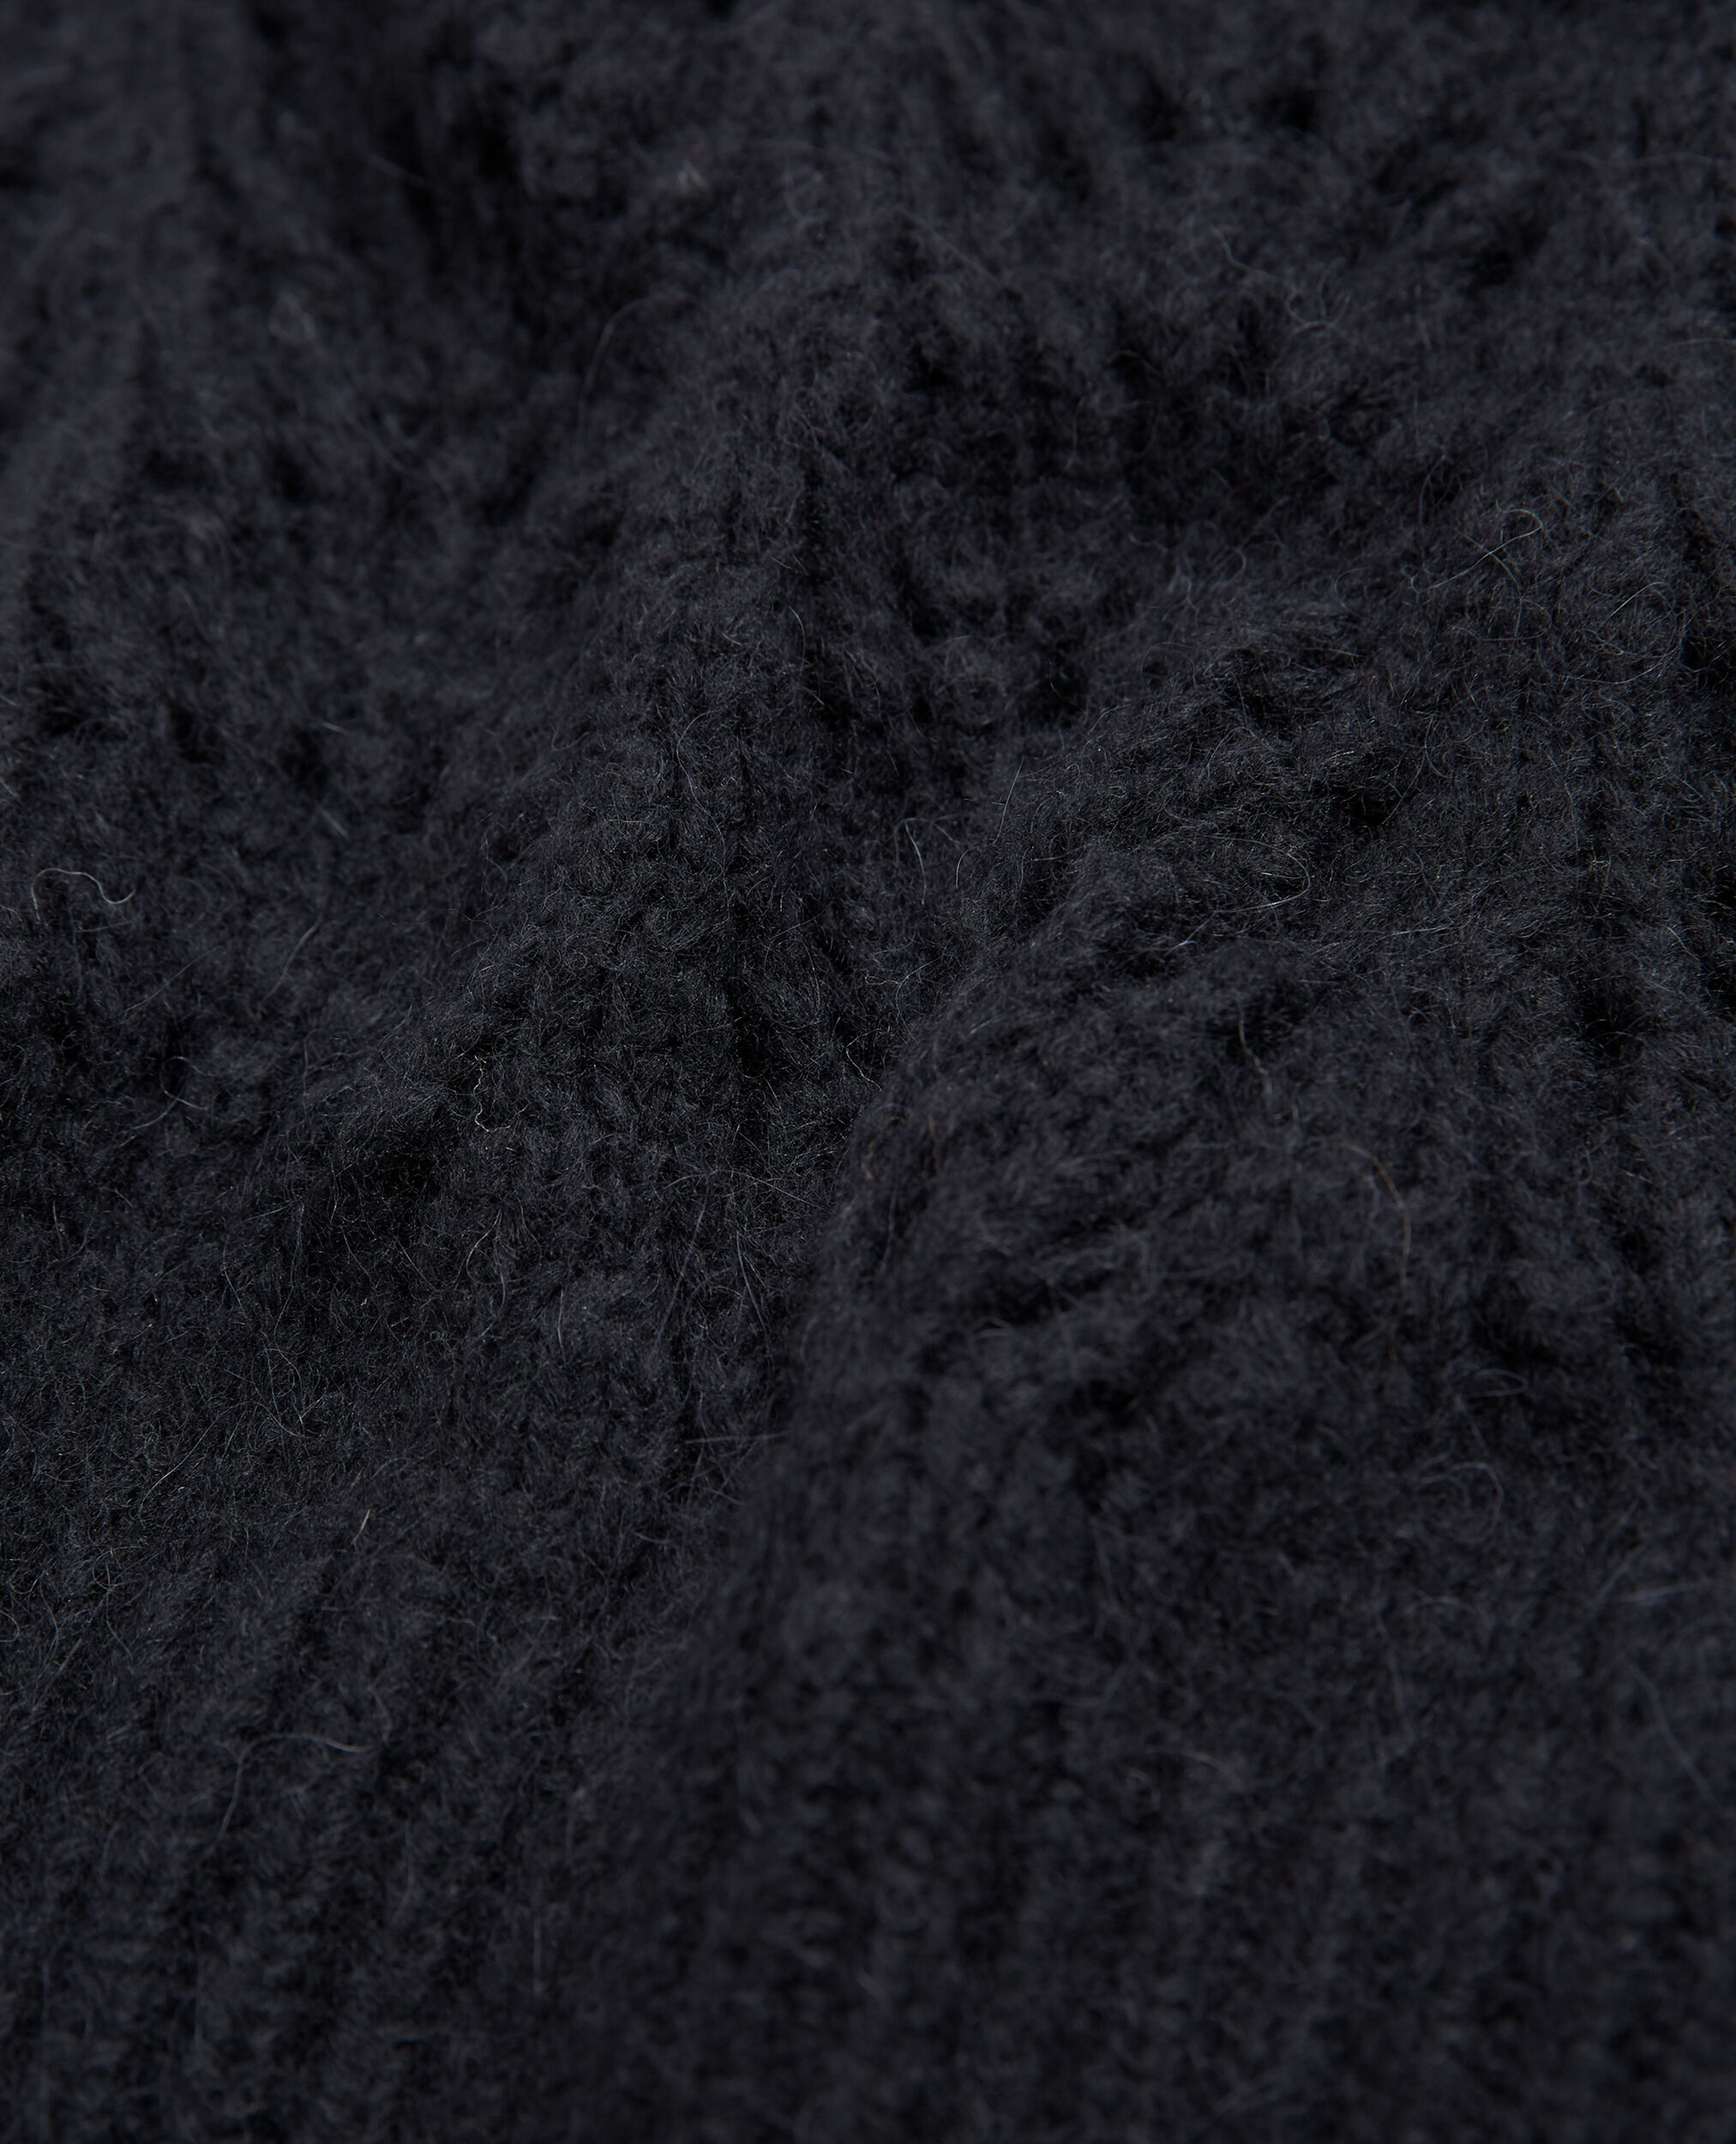 Knit black sweater with puffed sleeves, BLACK, hi-res image number null